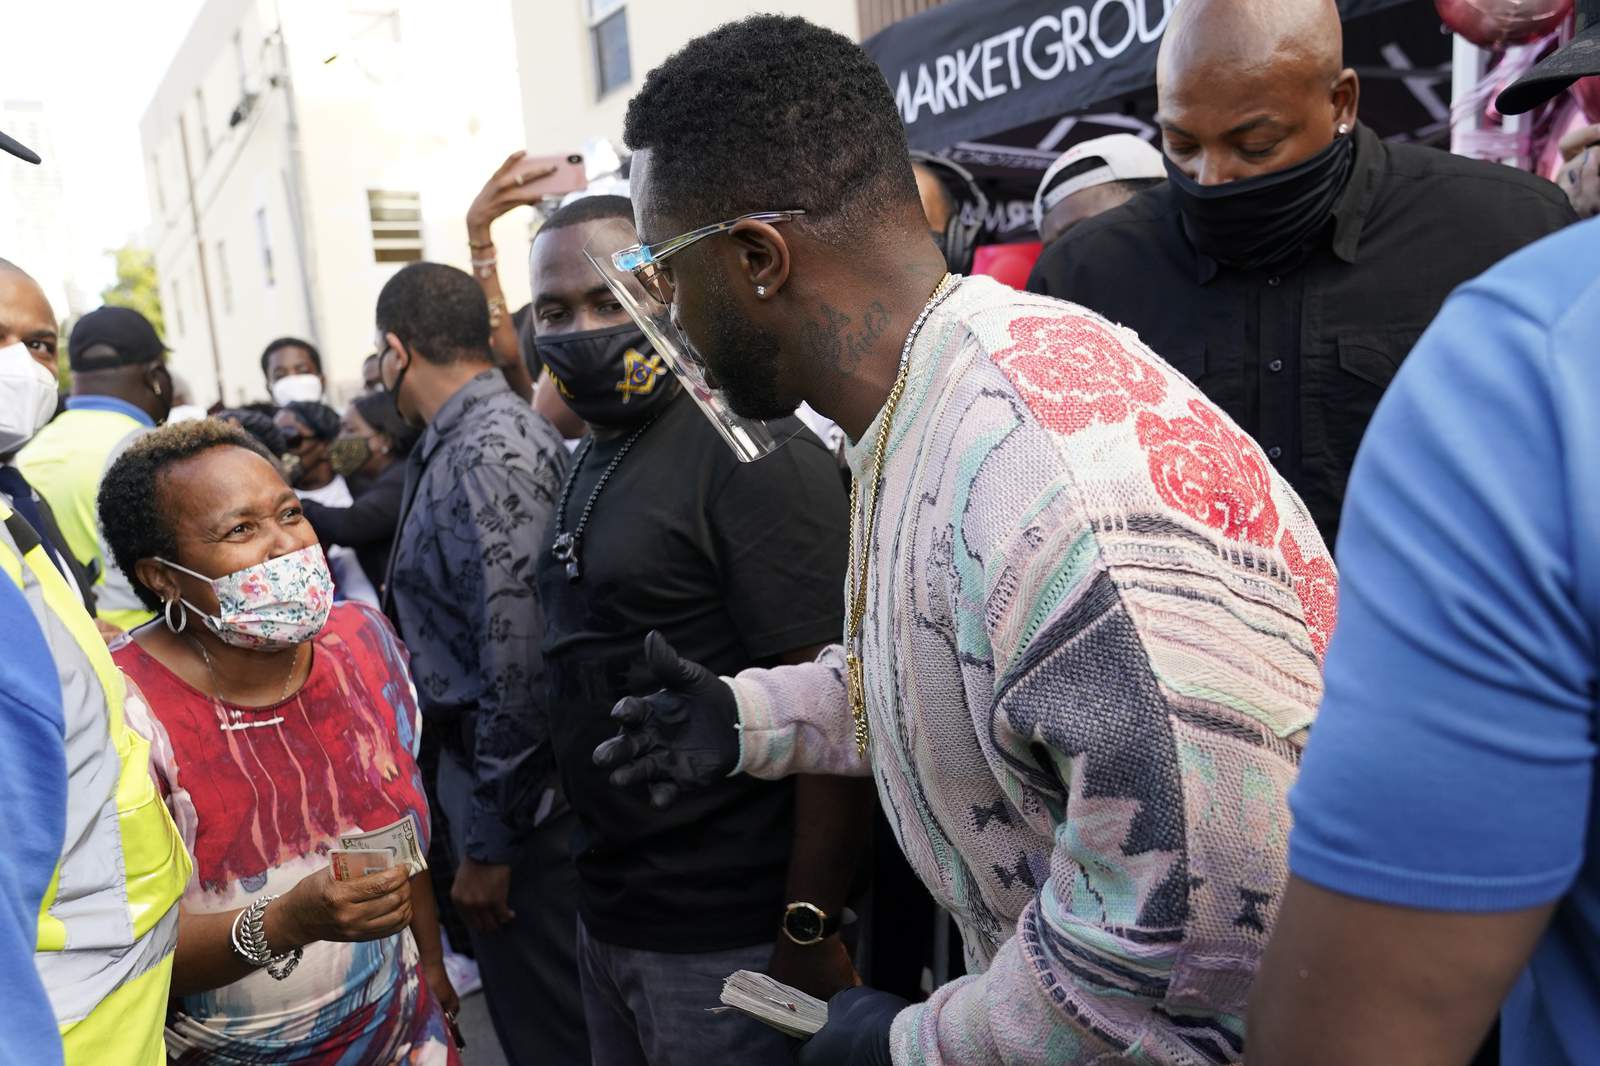 Diddy providing some COVID-19 relief for Miami neighborhood